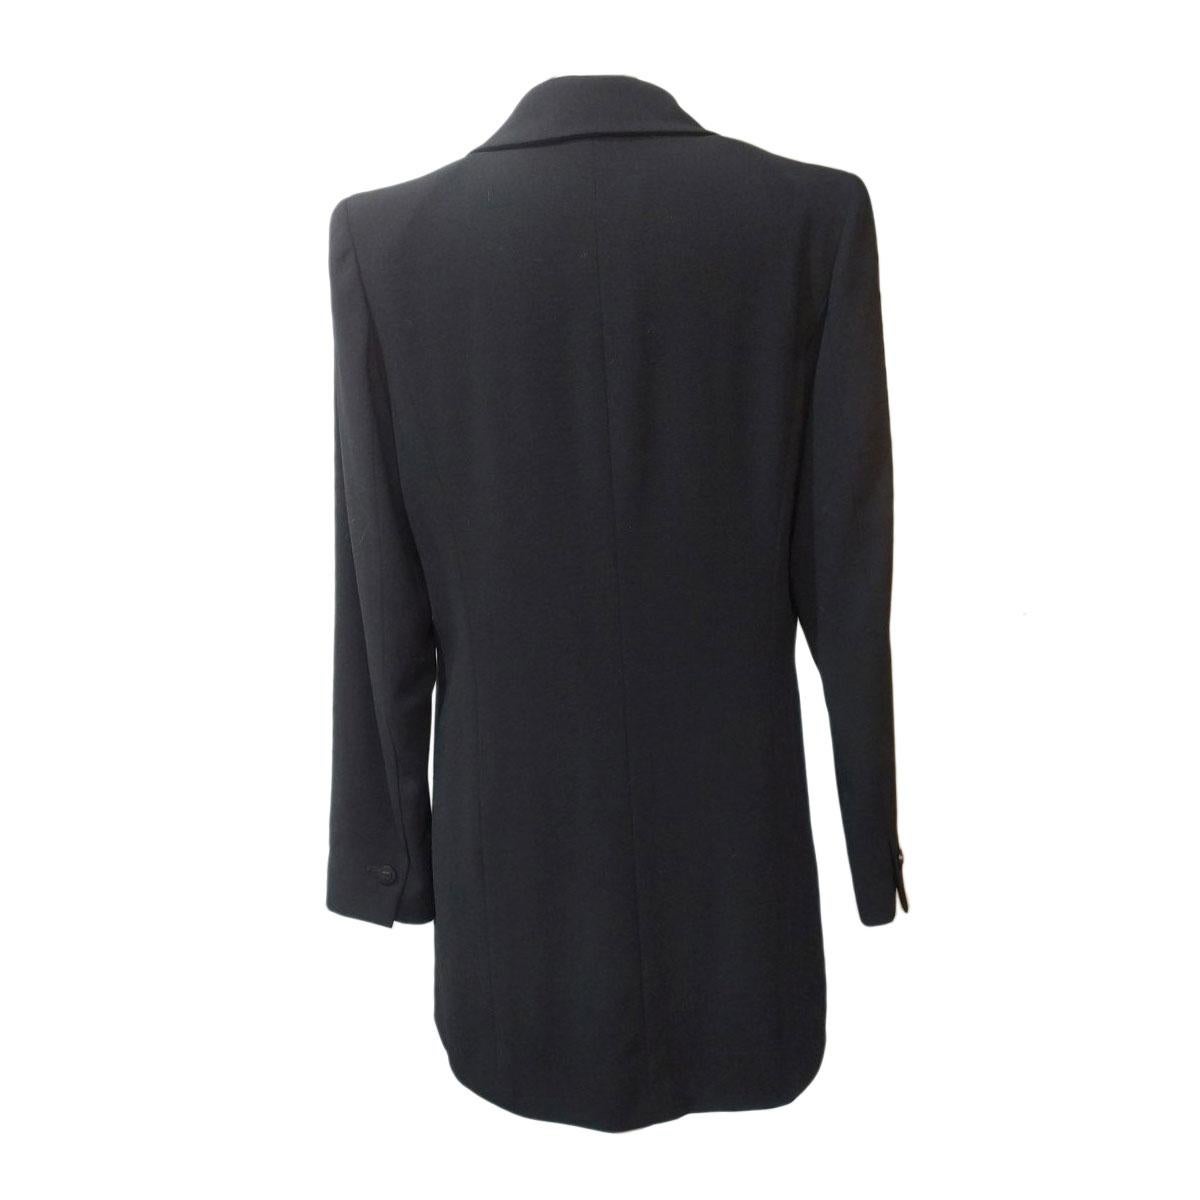 Fantastic Chanel jacket, super chic
100% Wool
Silk lining
Black color
Two pockets
Two buttons
Shoulder/hem length cm 75 (29.5inches)
Shoulder length cm 40 (15.7 inches)
Worldwide express shipping included in the price !